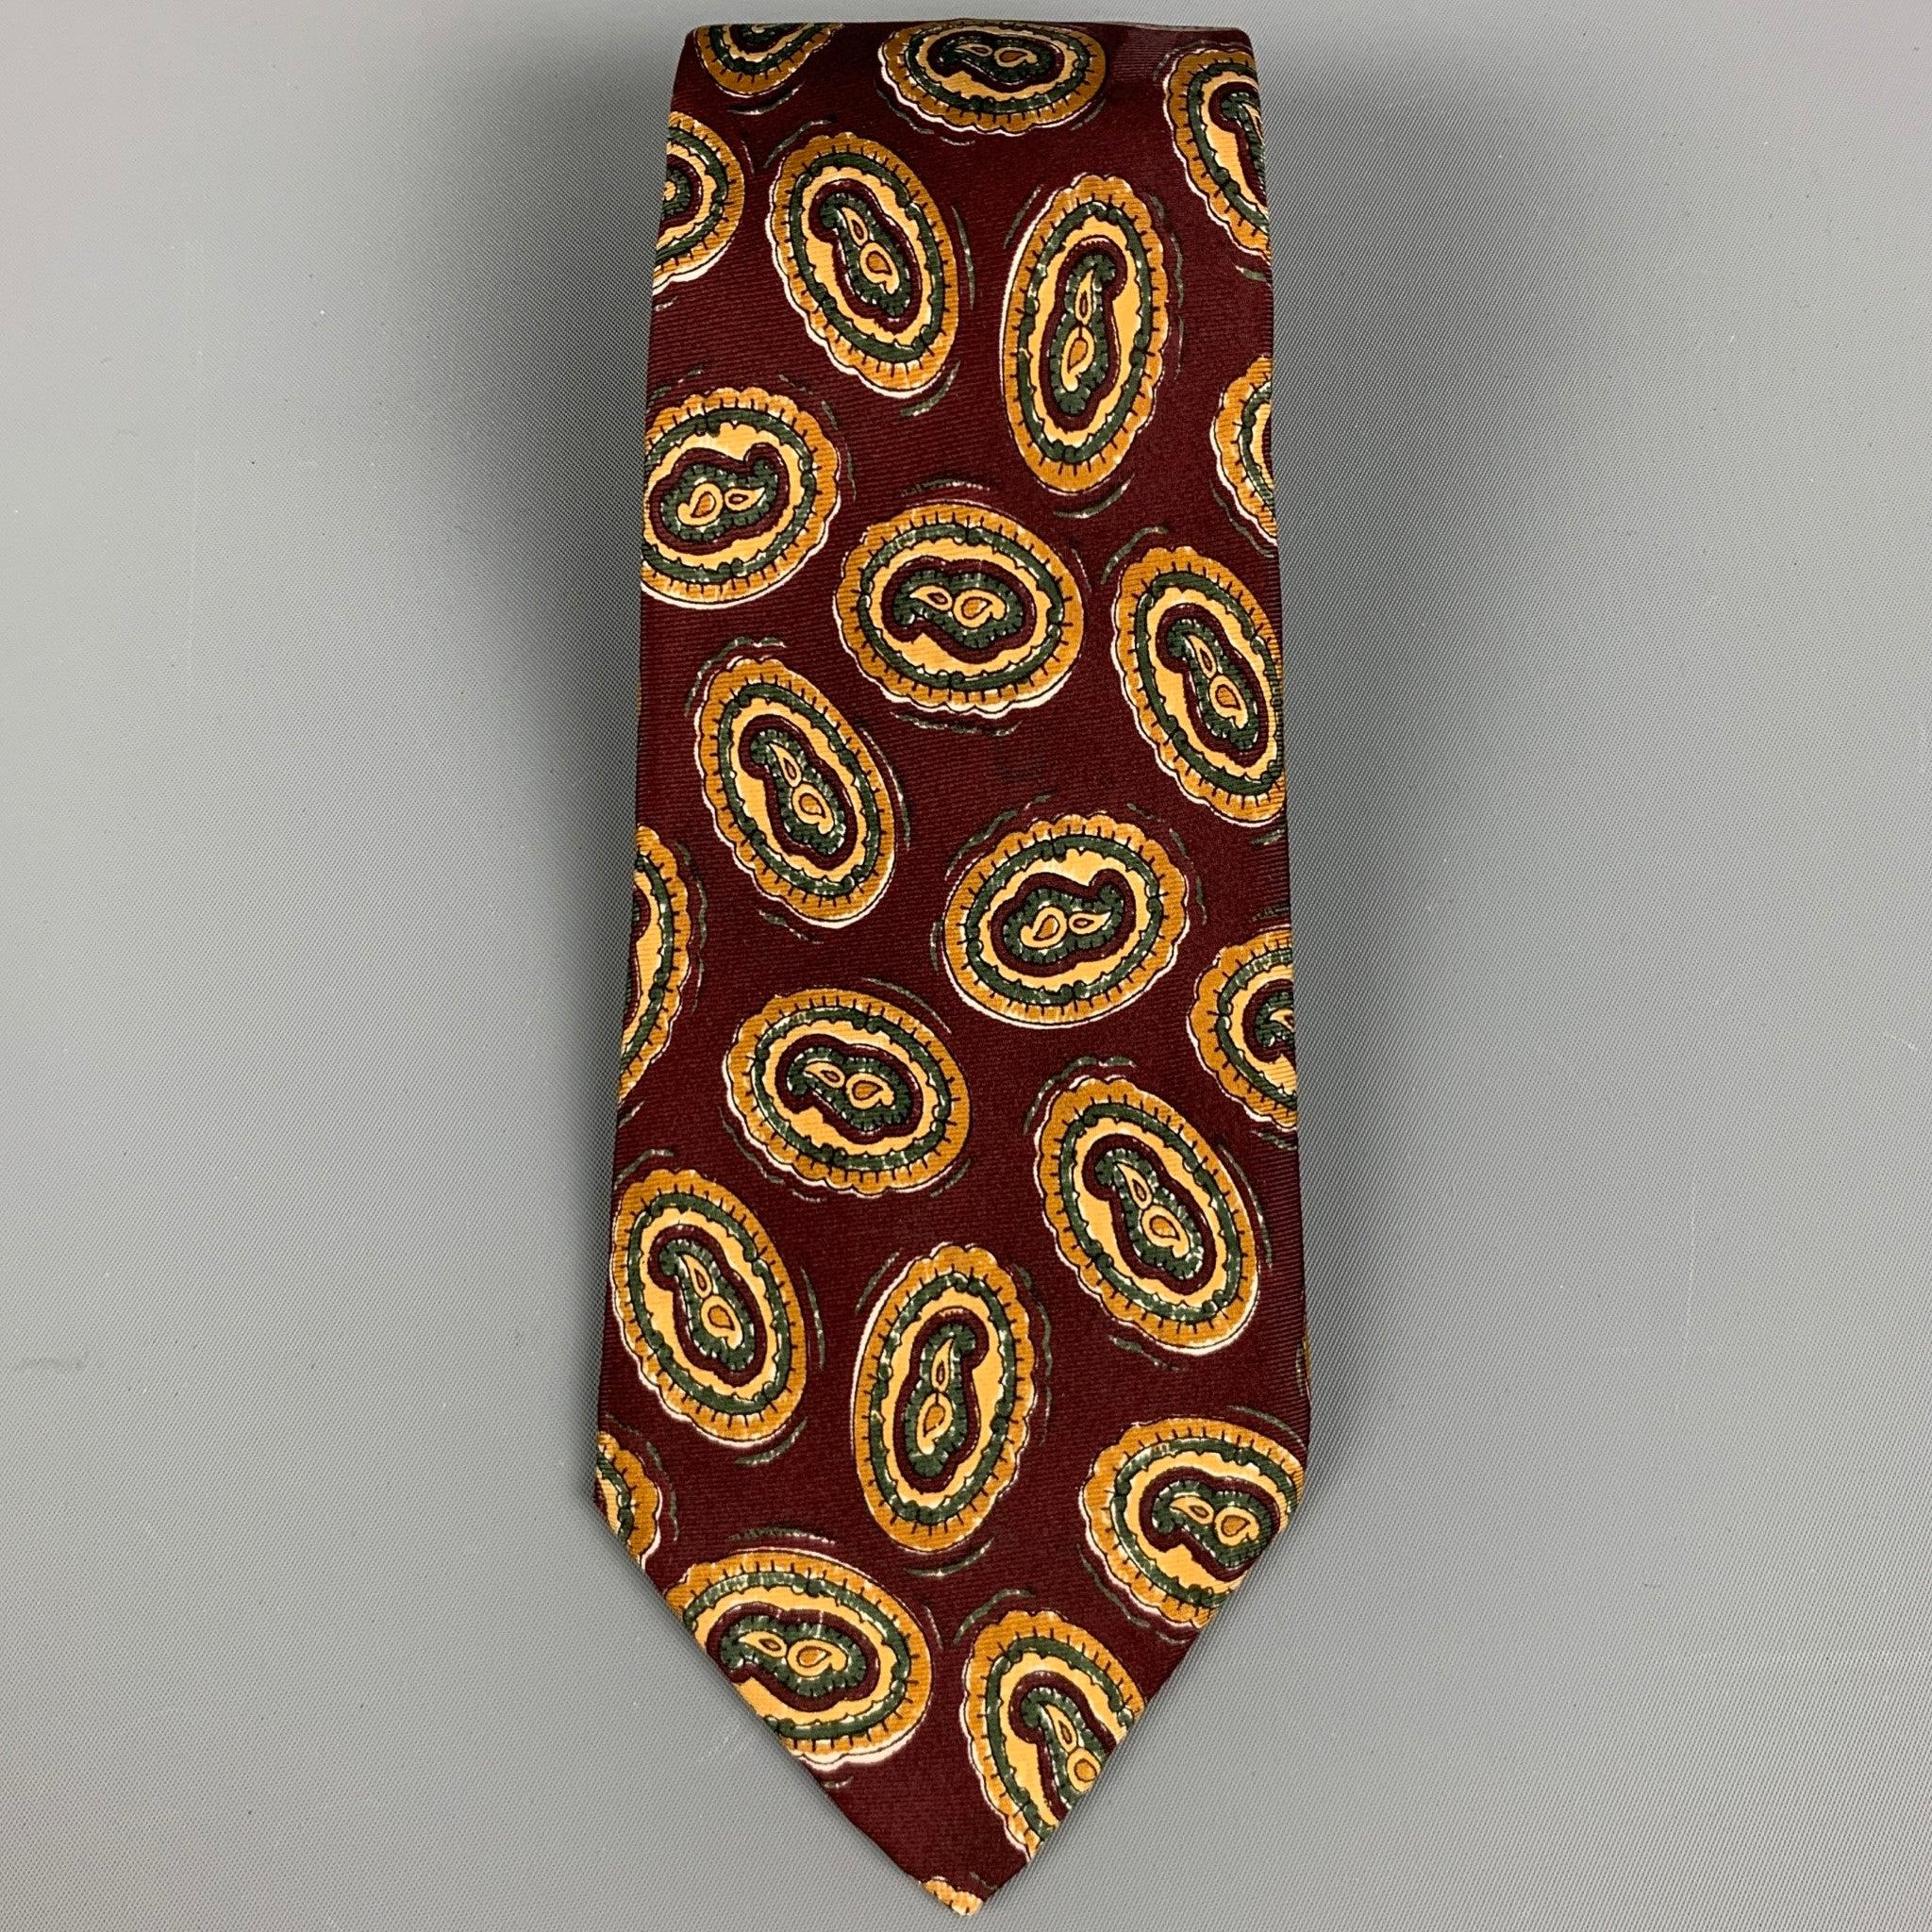 FENDI
necktie in a burgundy silk fabric featuring beige paisley pattern. Handmade in Italy.Excellent Pre-Owned Condition. 

Measurements: 
  Width: 3.5 inches Length: 60 inches 
  
  
 
Reference: 128075
Category: Tie
More Details
    
Brand: 